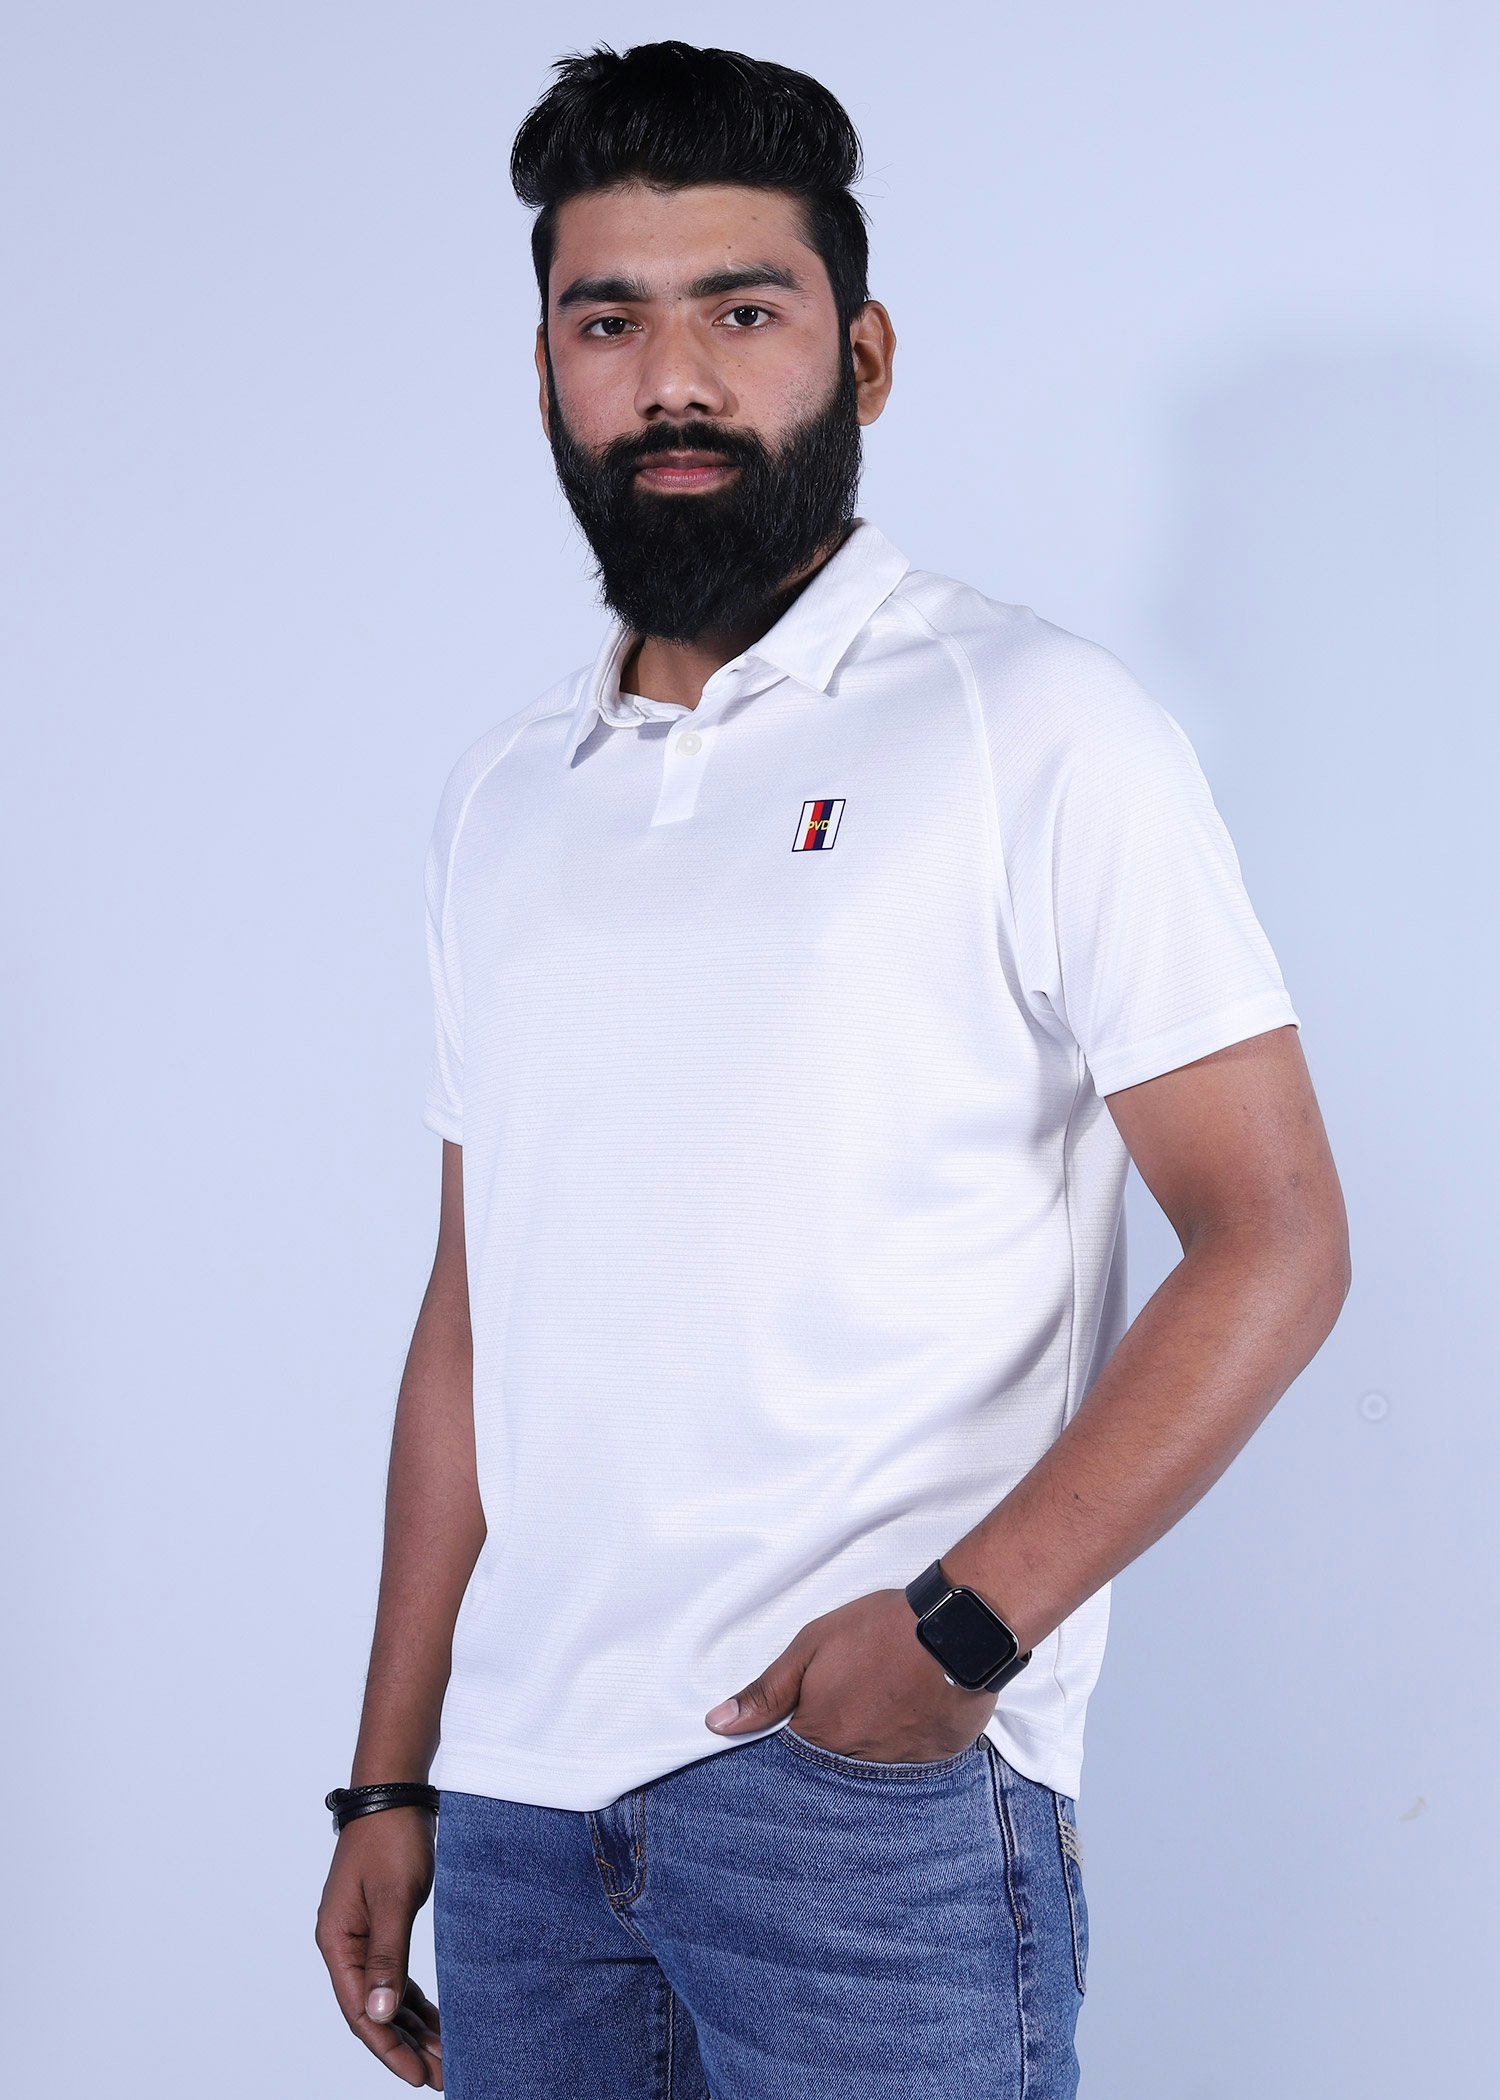 holfman polo white color half side view